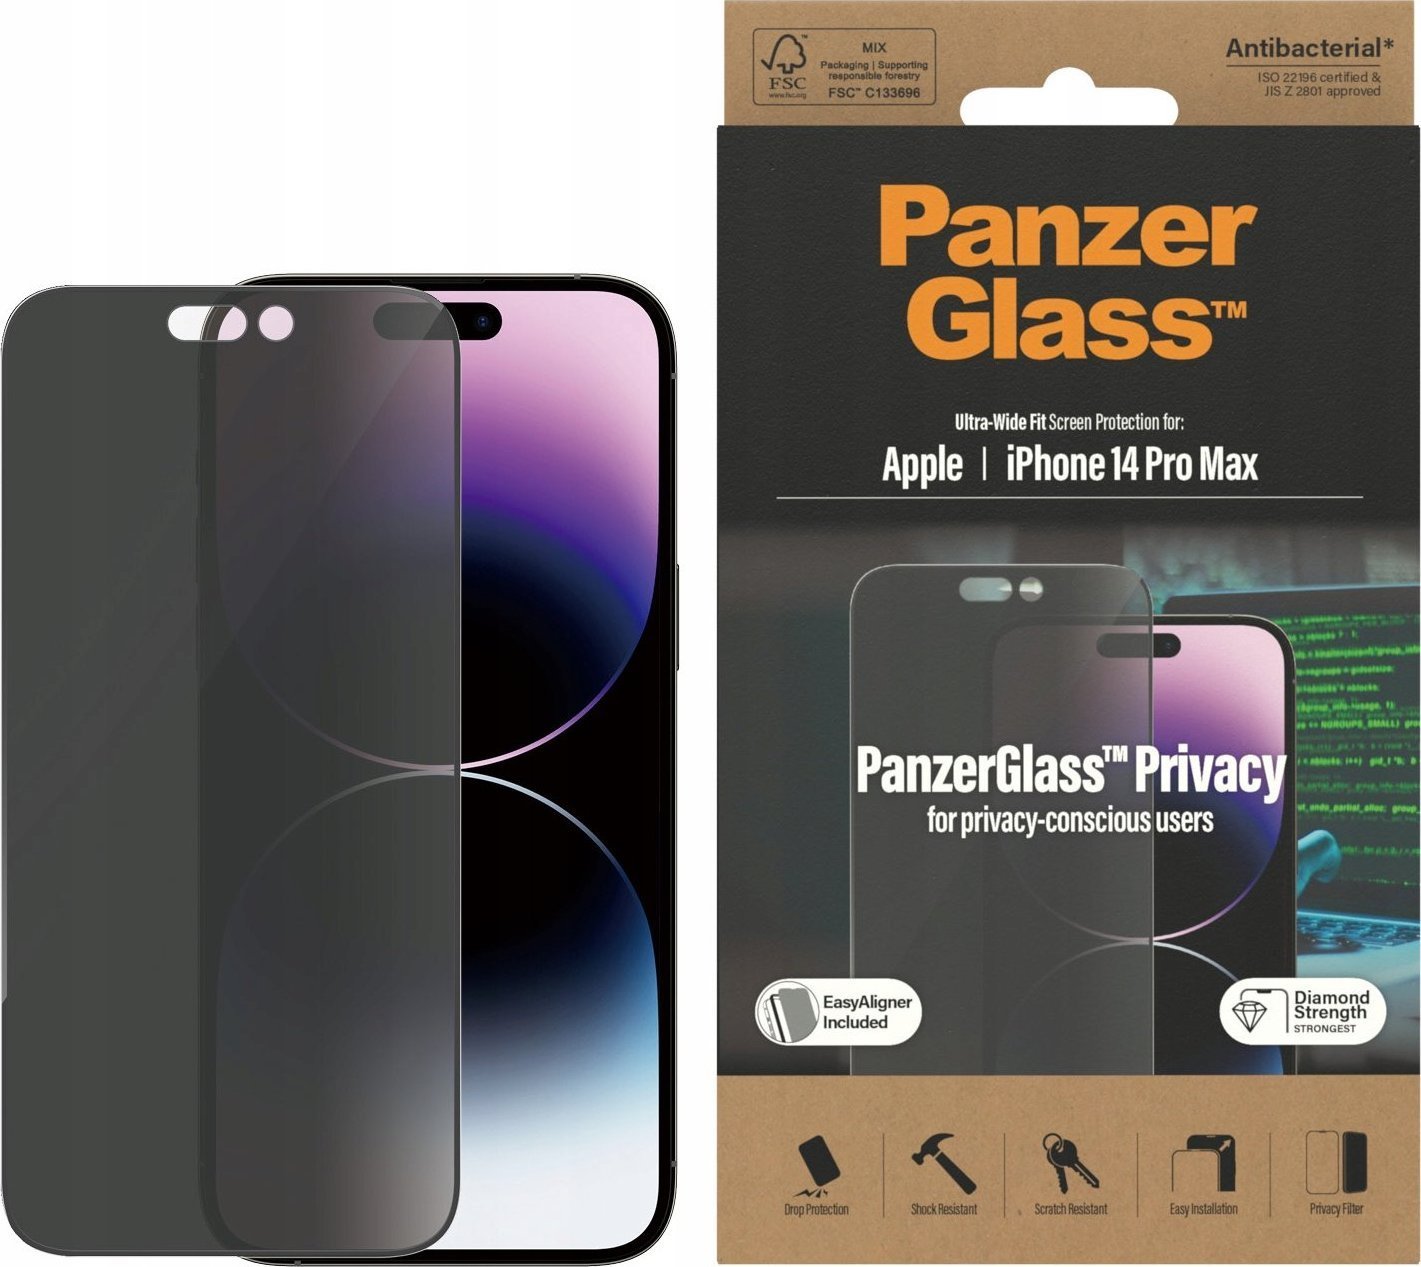 PanzerGlass PanzerGlass Ultra-Wide Fit iPhone 14 Pro Max 6,7` Privacy Screen Protection Antibacterial Easy Aligner Included P2786